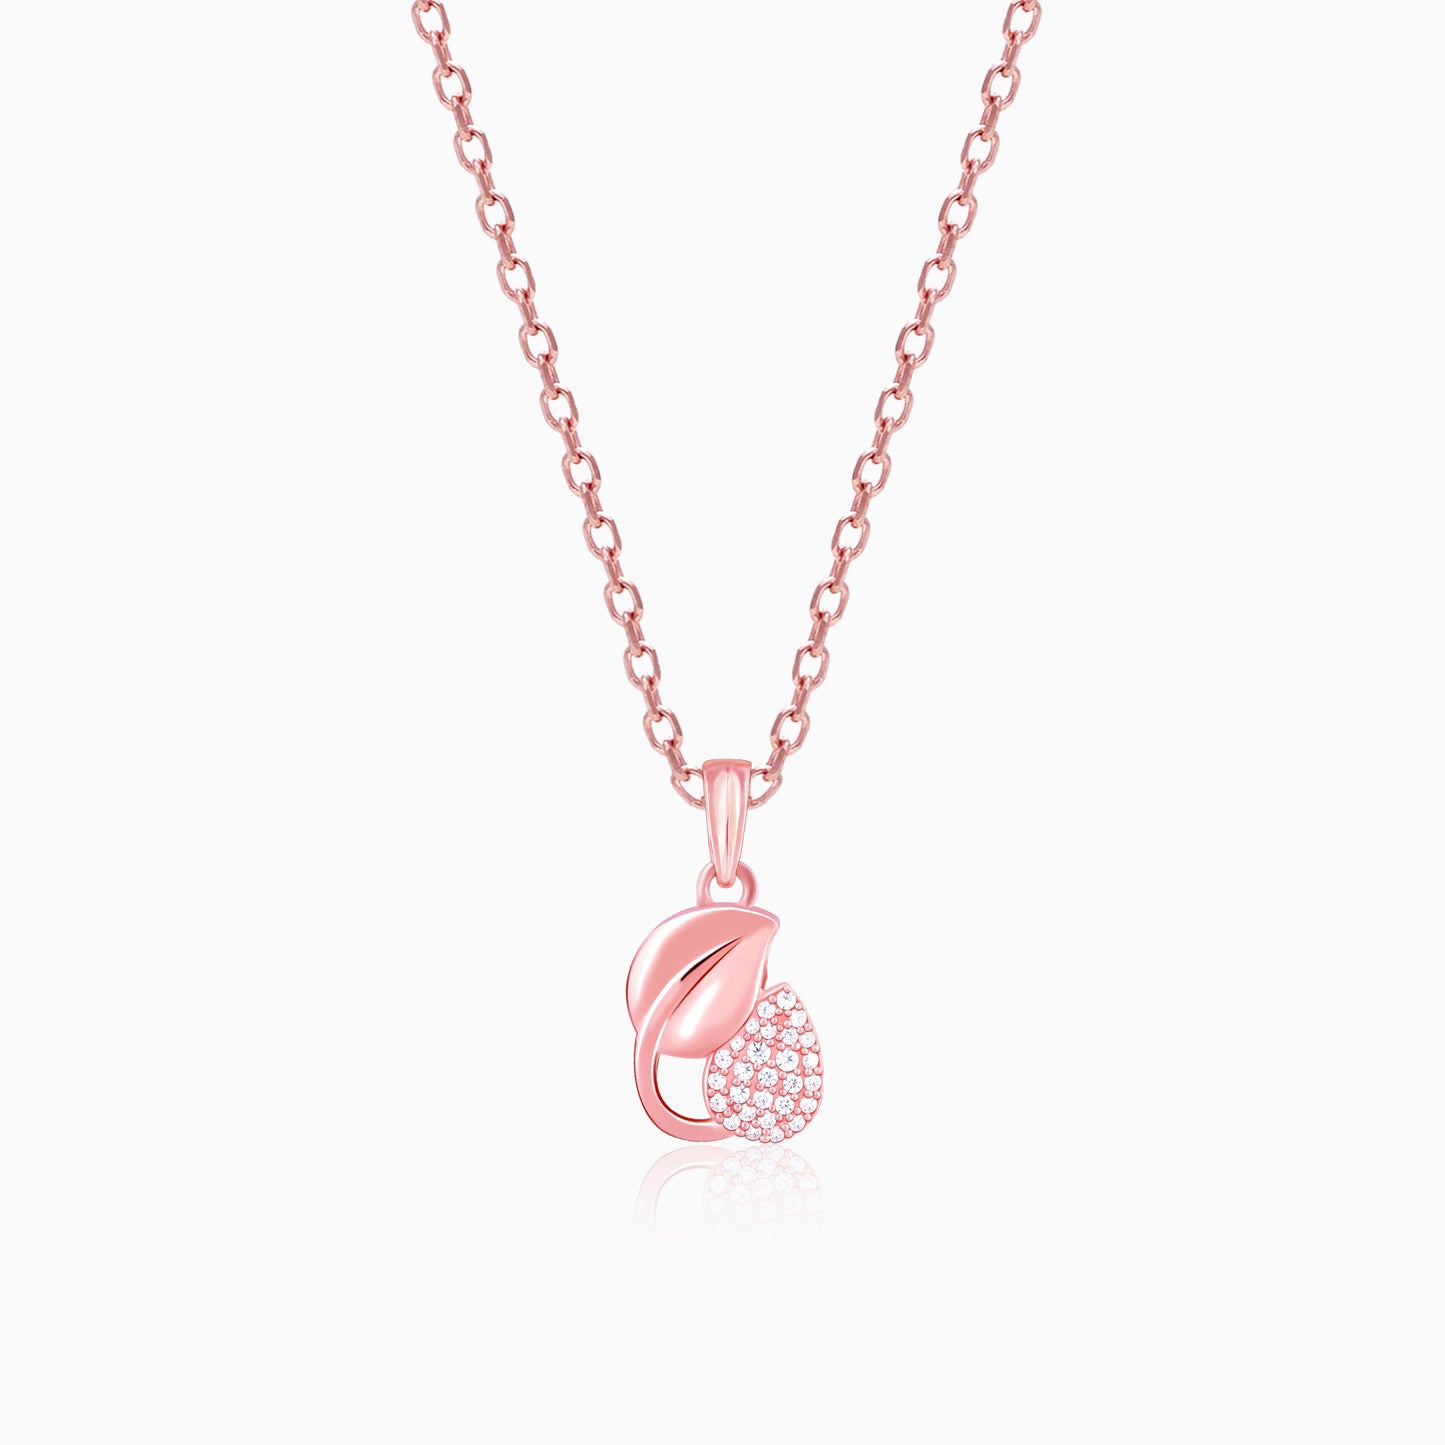 Rose Gold Sprig Of Leaf Pendant With Link Chain